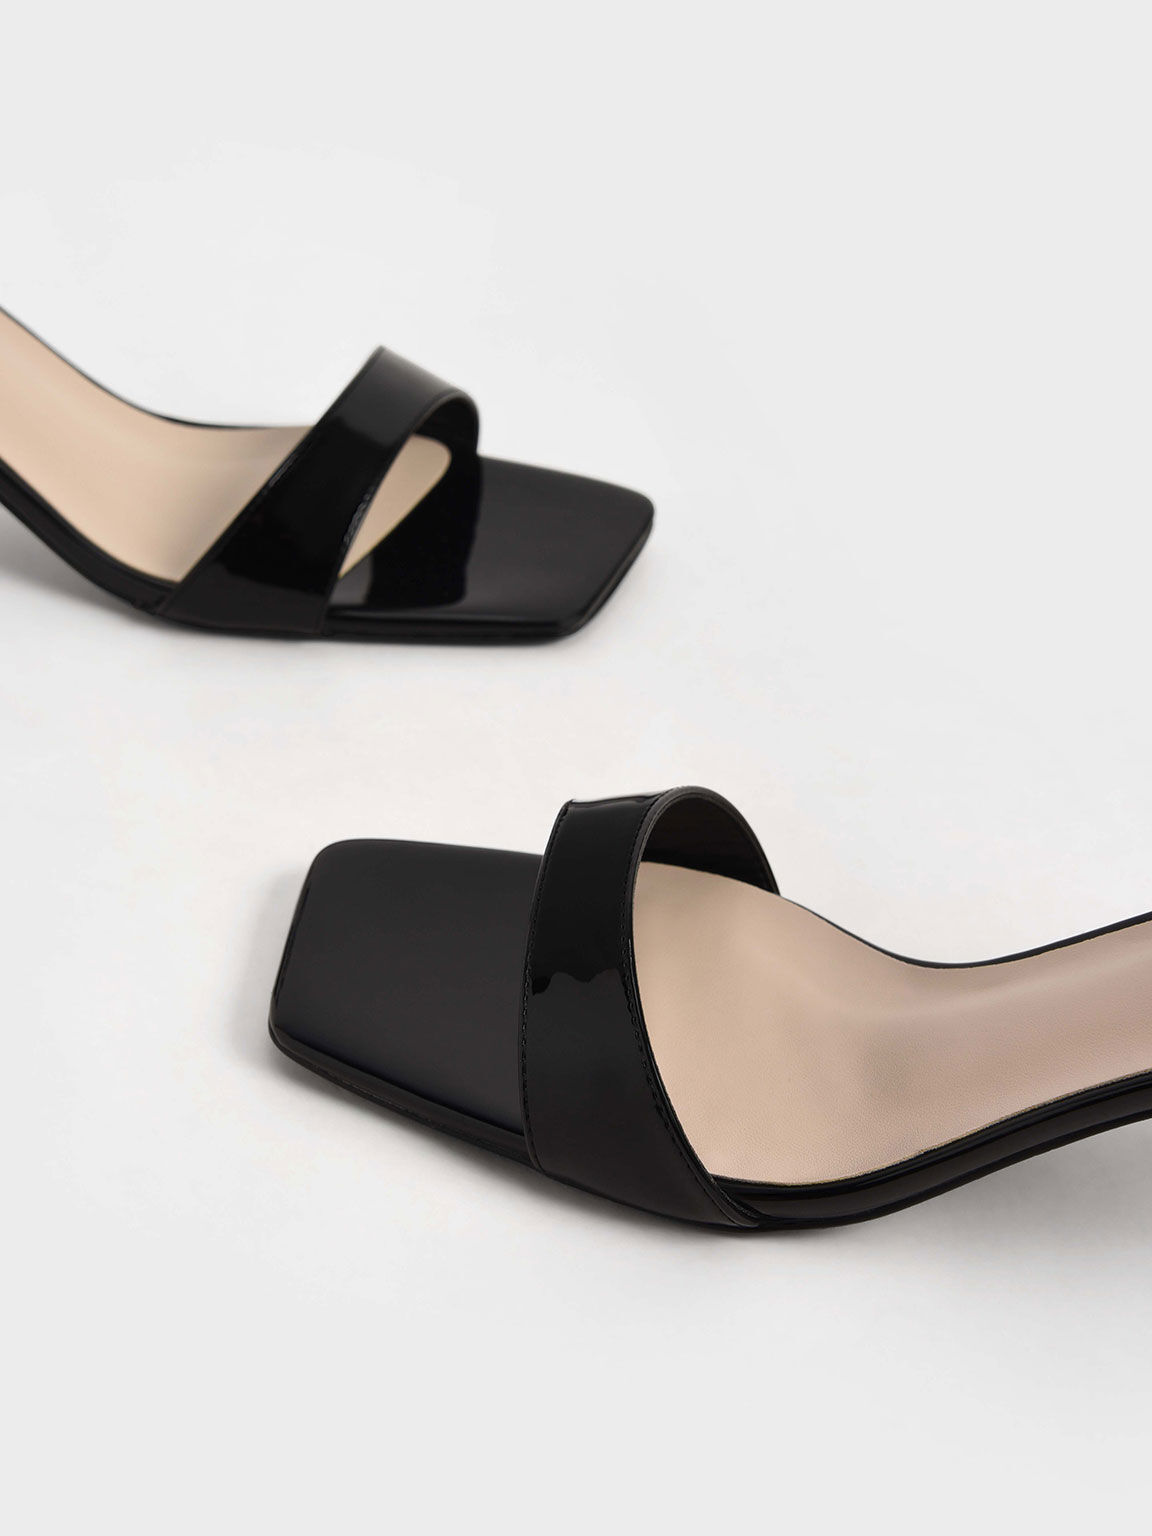 Black Patent Ankle-Strap Cylindrical Heel Sandals - CHARLES & KEITH UK